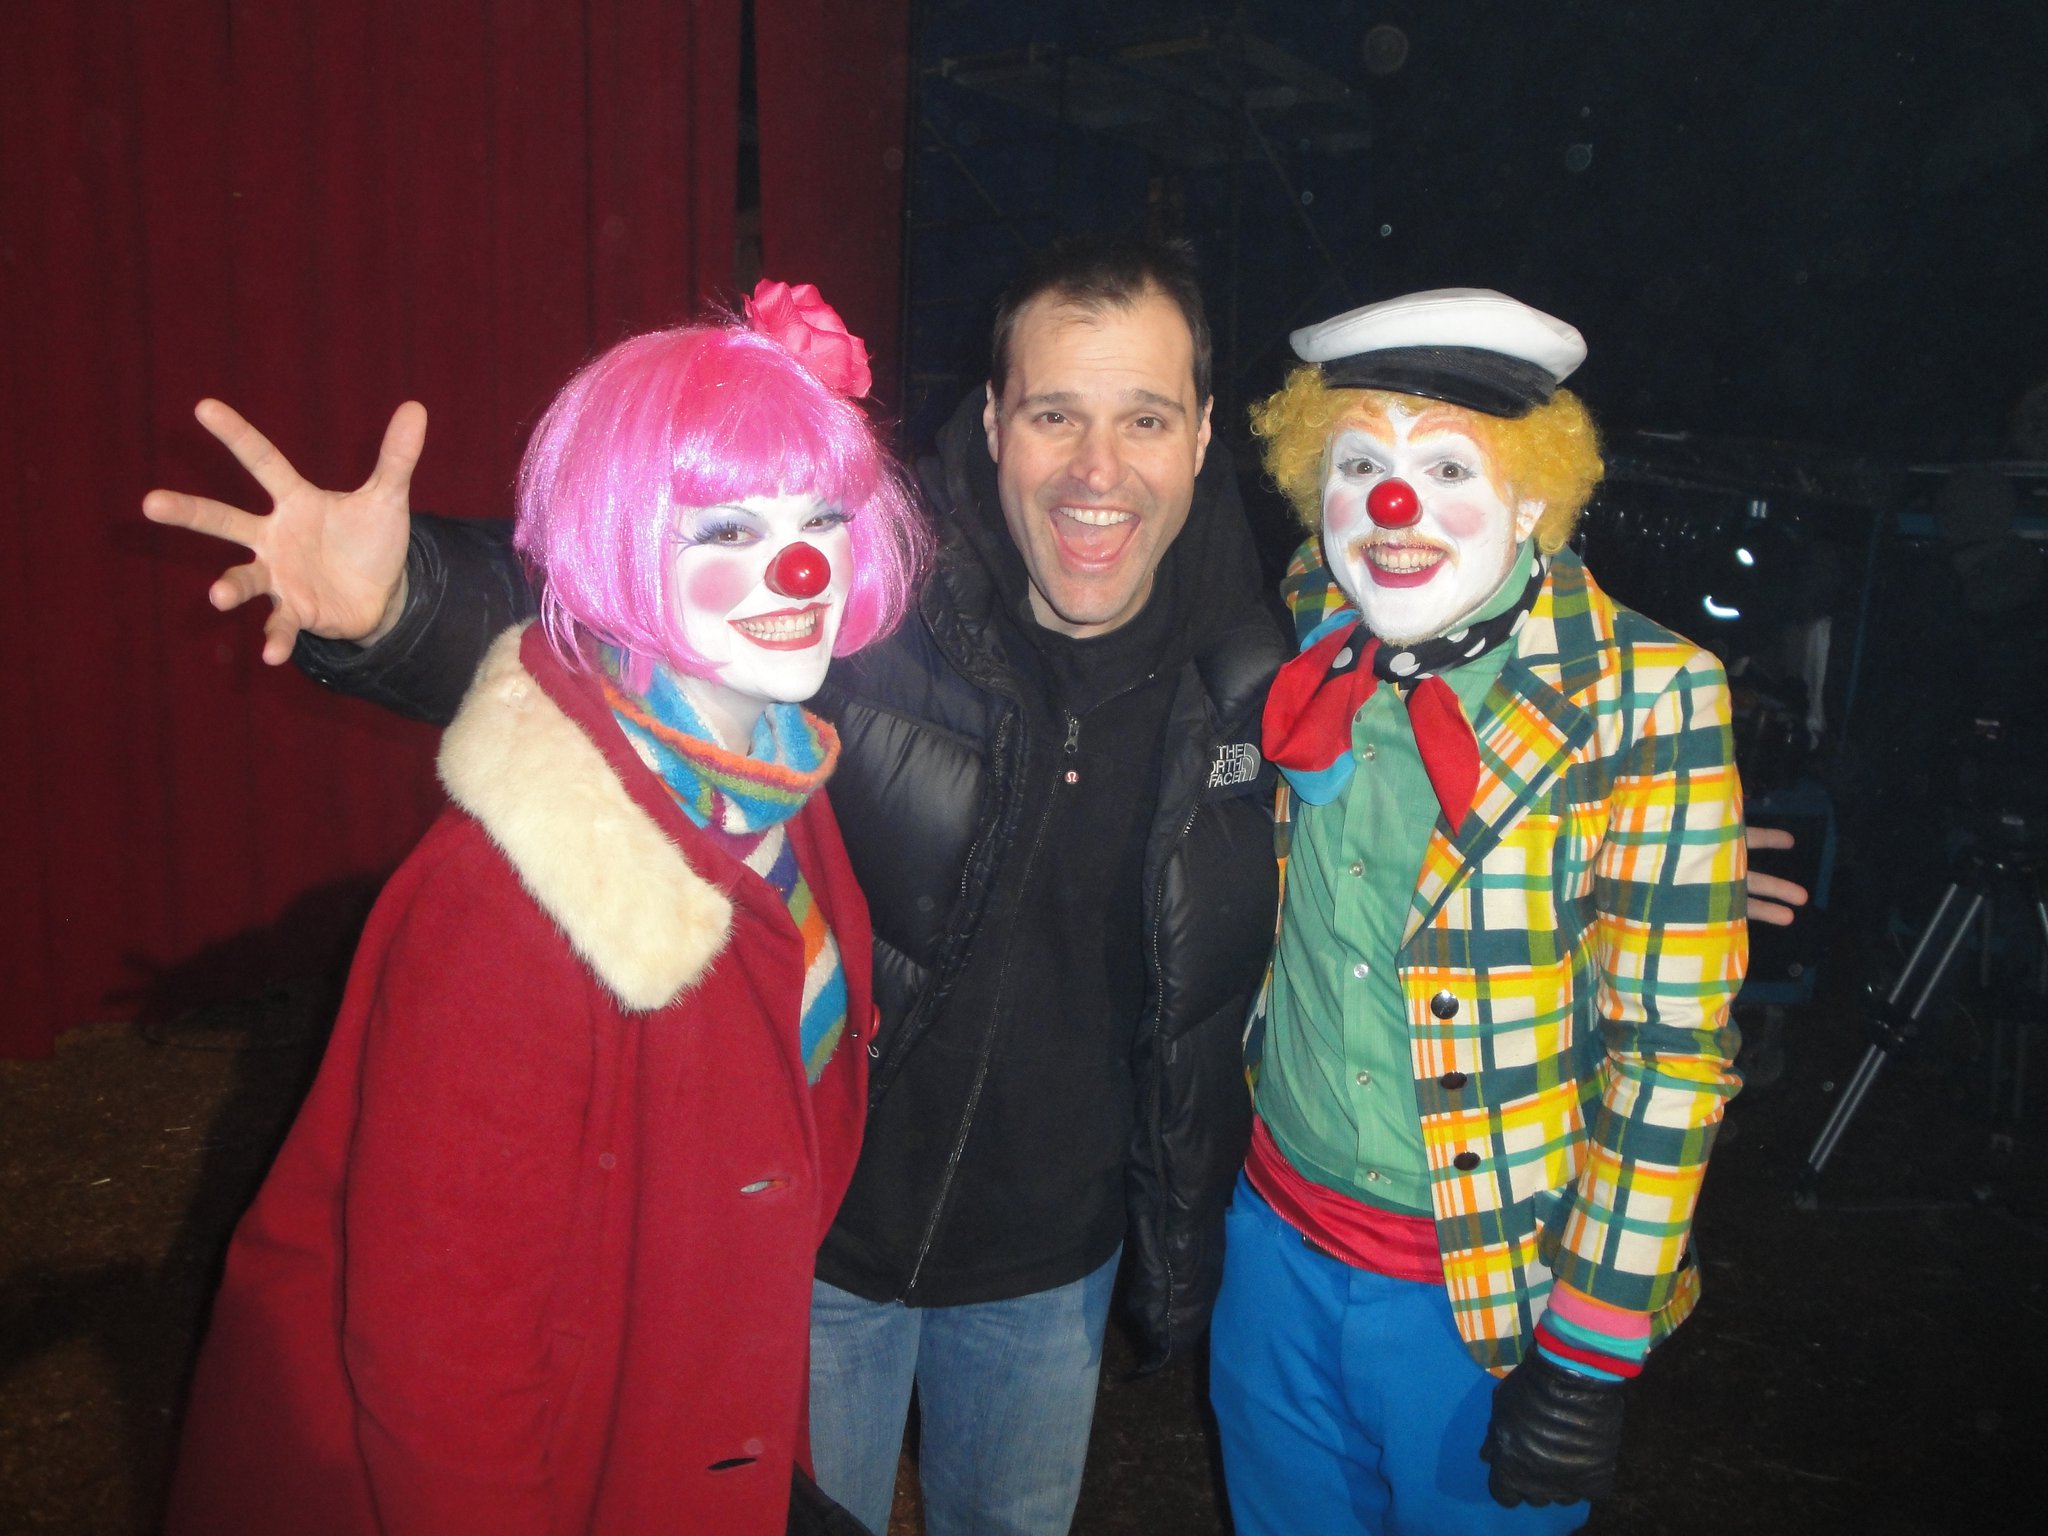 S. Siobhan McCarthy as Blyss with Director Peter DeLuise and Oatmeal the Clown Michael Undem on the set of 